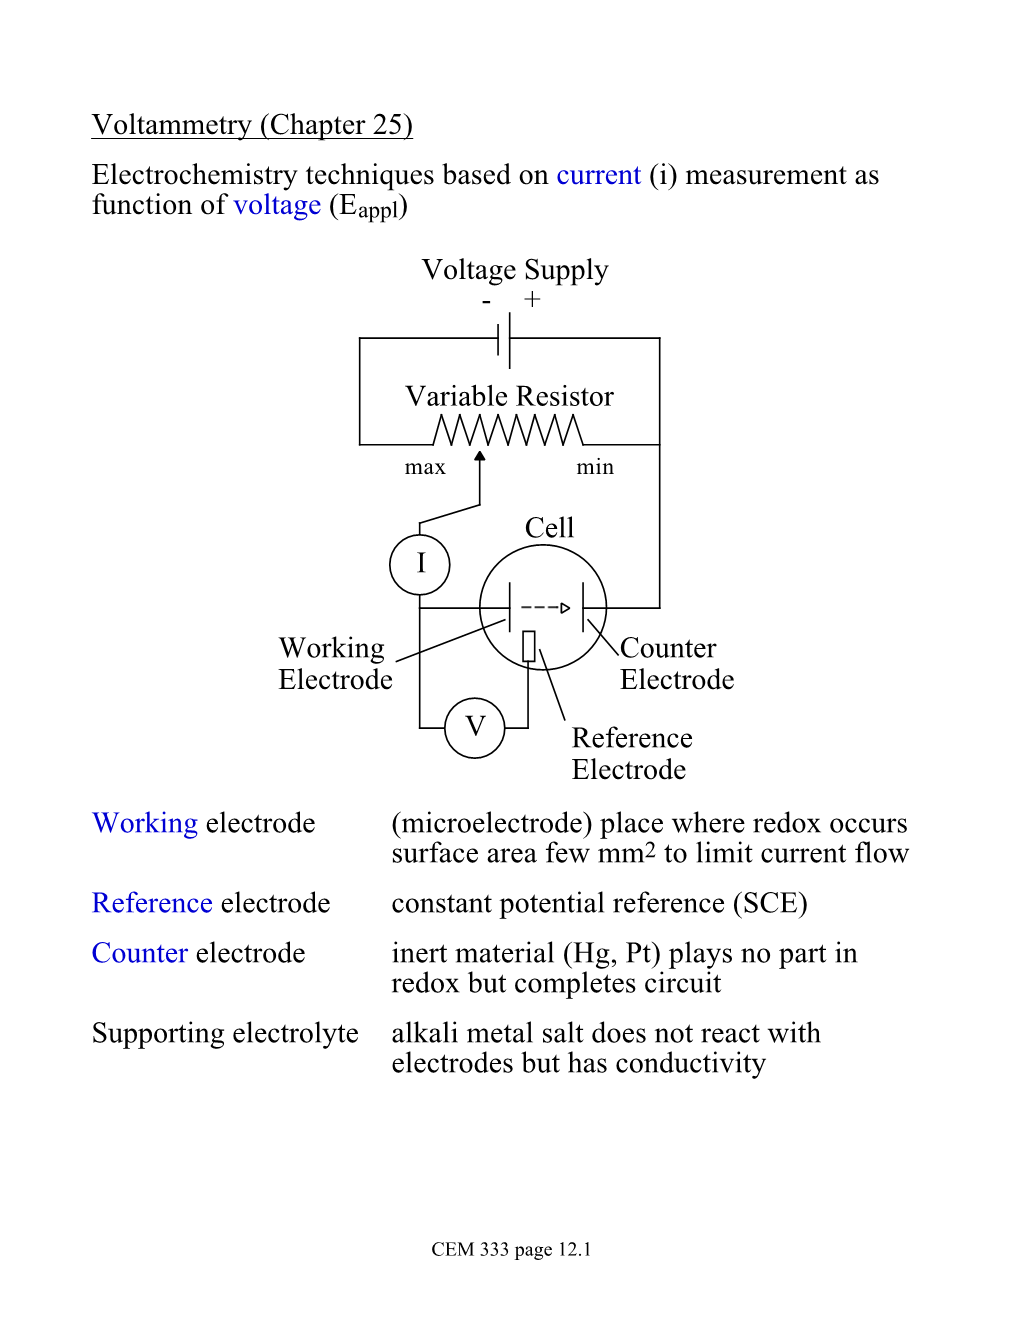 Voltammetry (Chapter 25) Electrochemistry Techniques Based on Current (I) Measurement As Function of Voltage (Eappl)